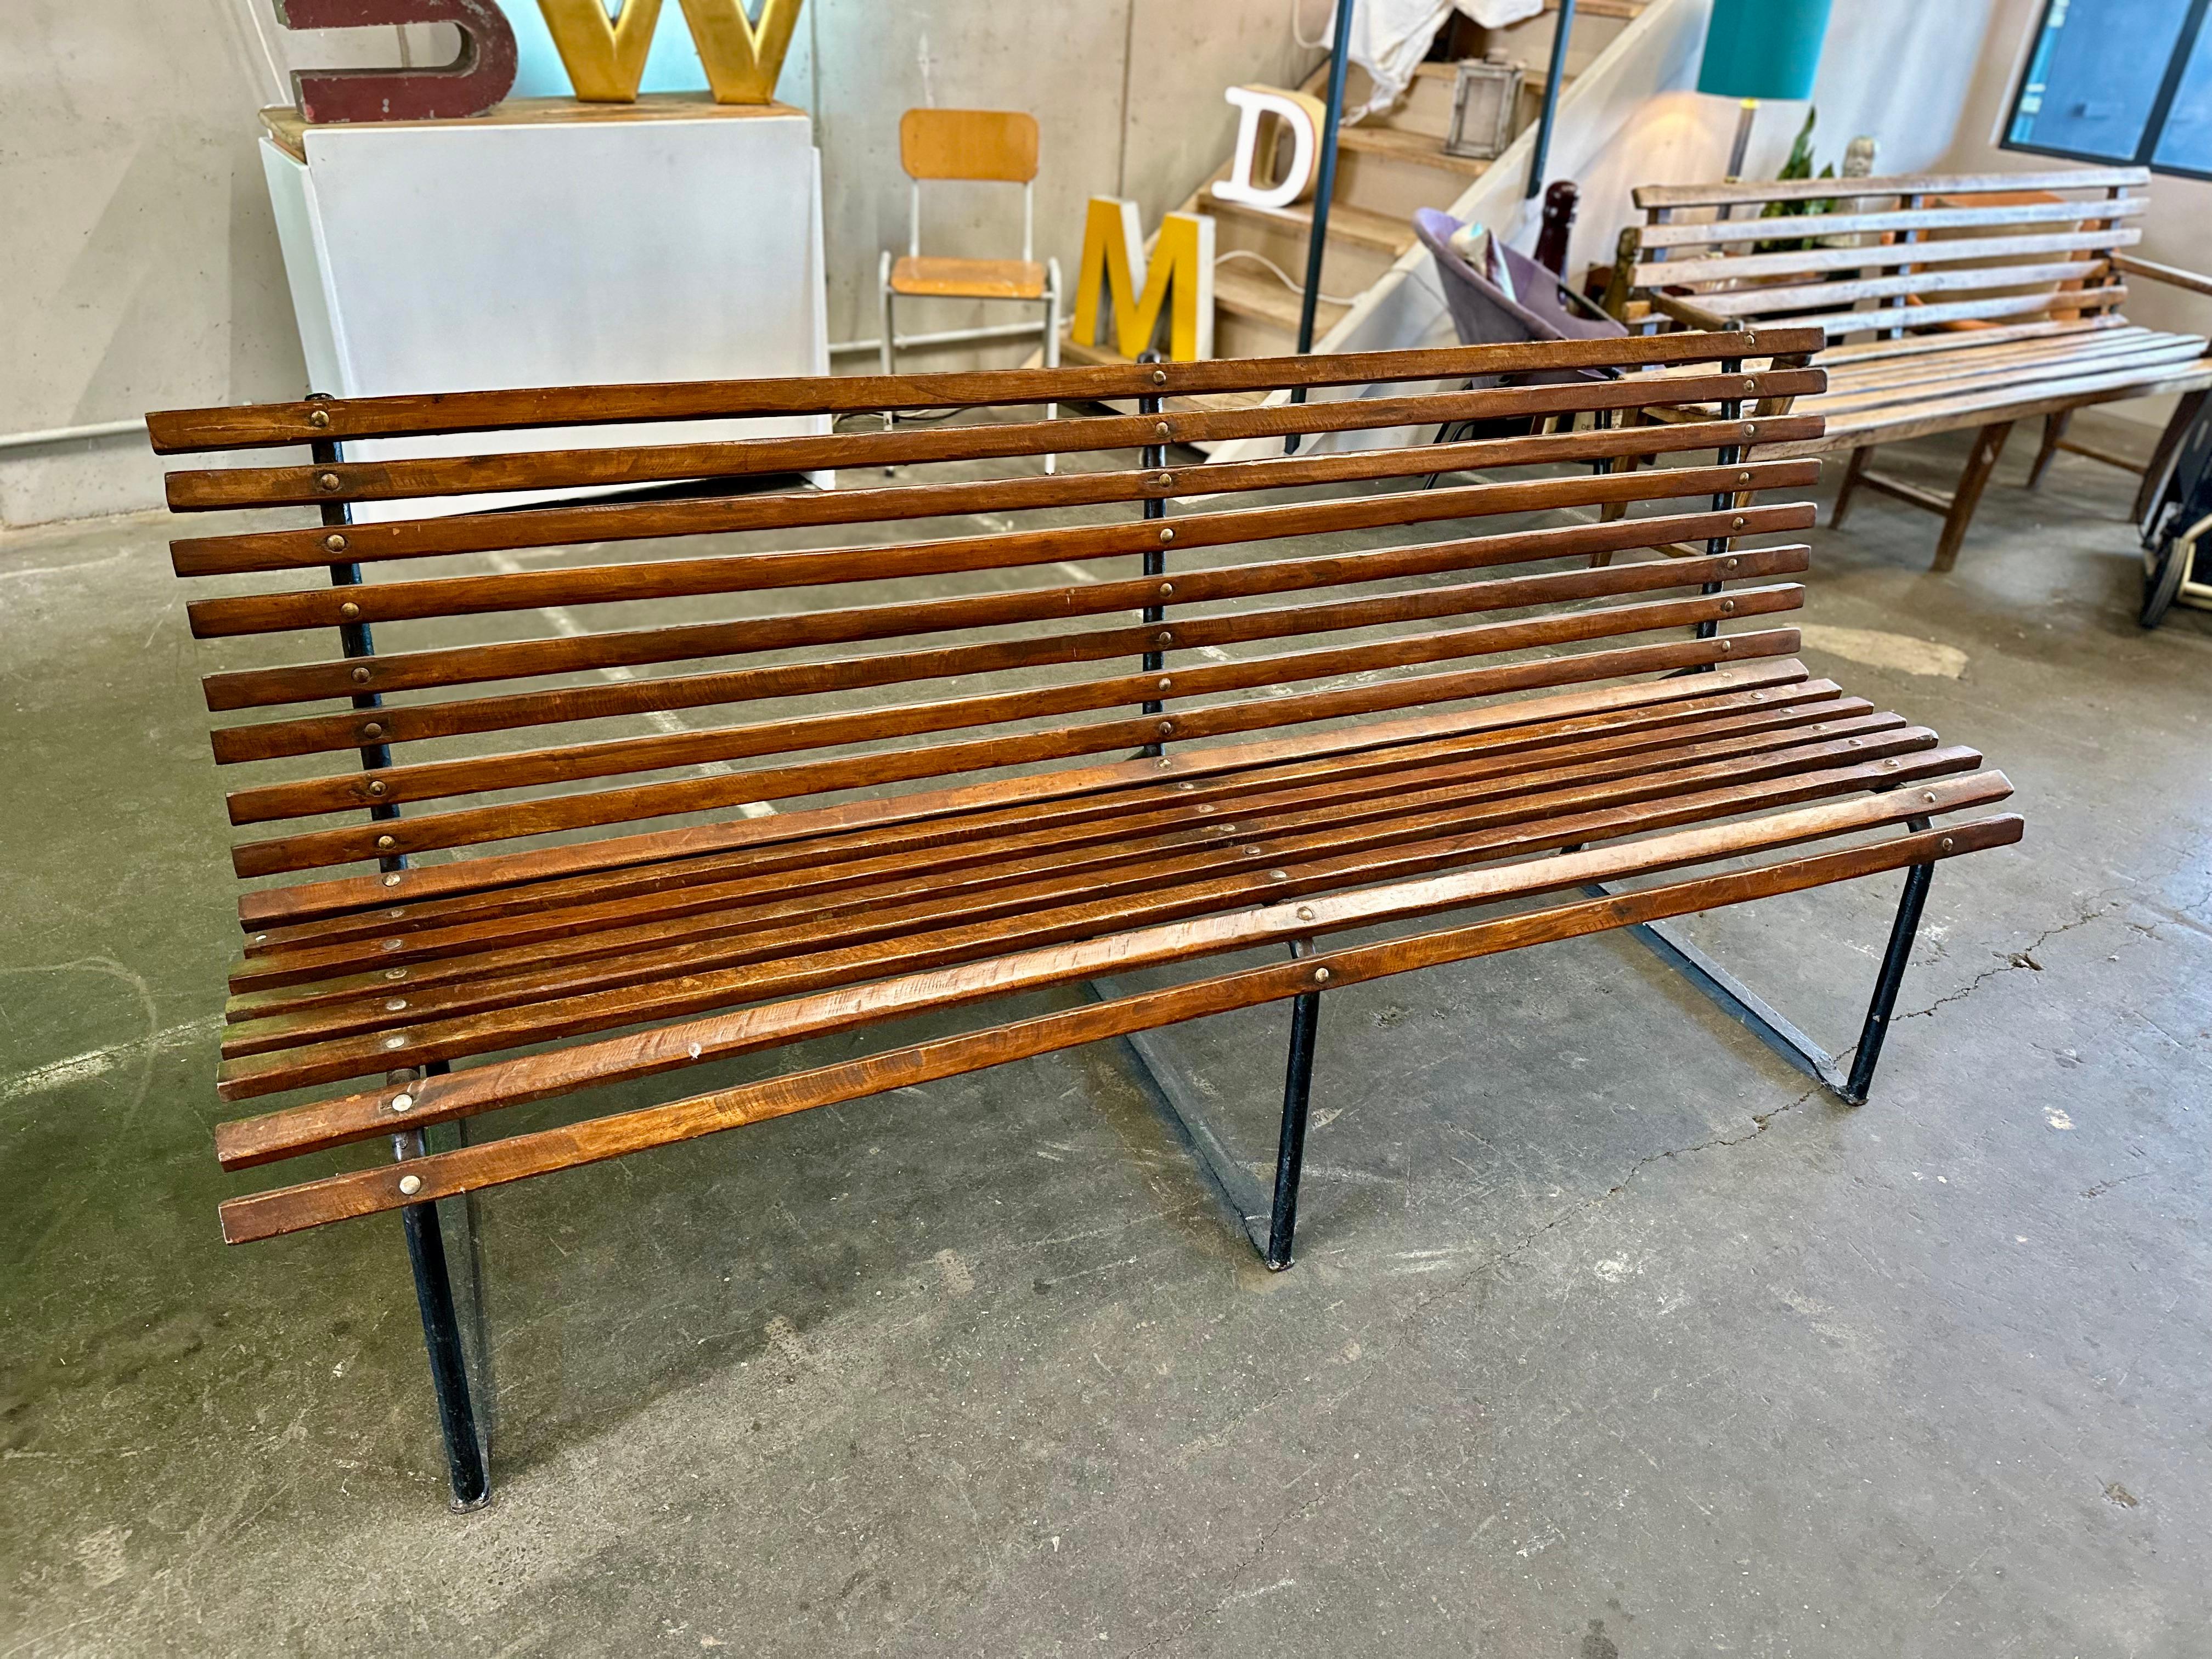 Indulge in timeless seating comfort with our handcrafted dark brown bench dating back to around 1920. The distinctive wooden slats not only lend a charming visual appeal but also carry a beautiful patina, showcasing the marks of bygone